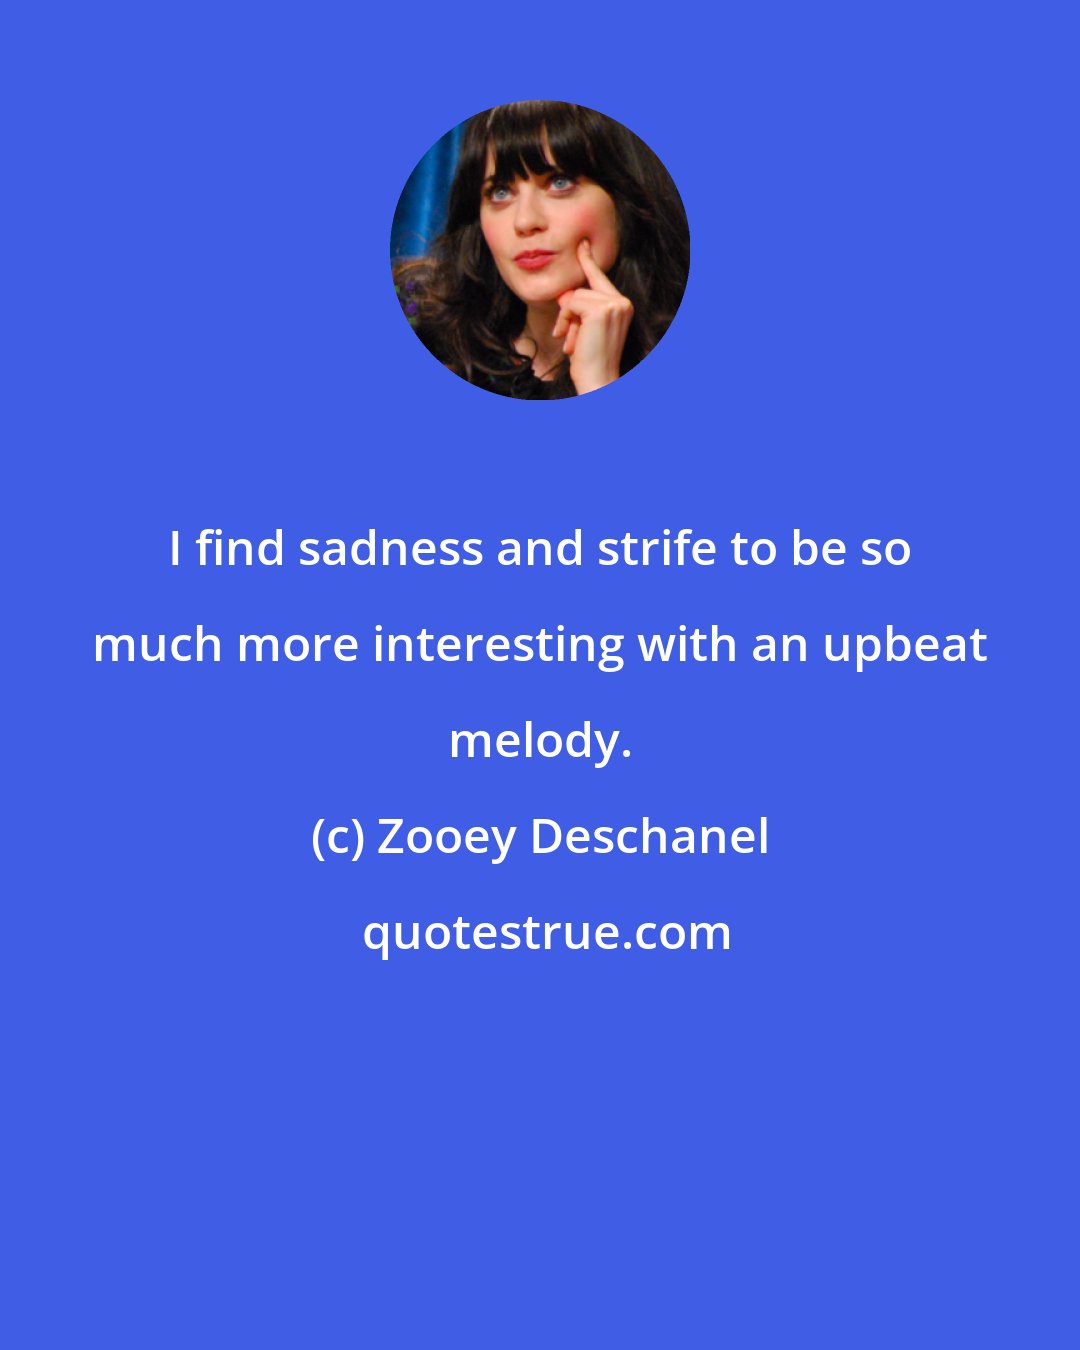 Zooey Deschanel: I find sadness and strife to be so much more interesting with an upbeat melody.